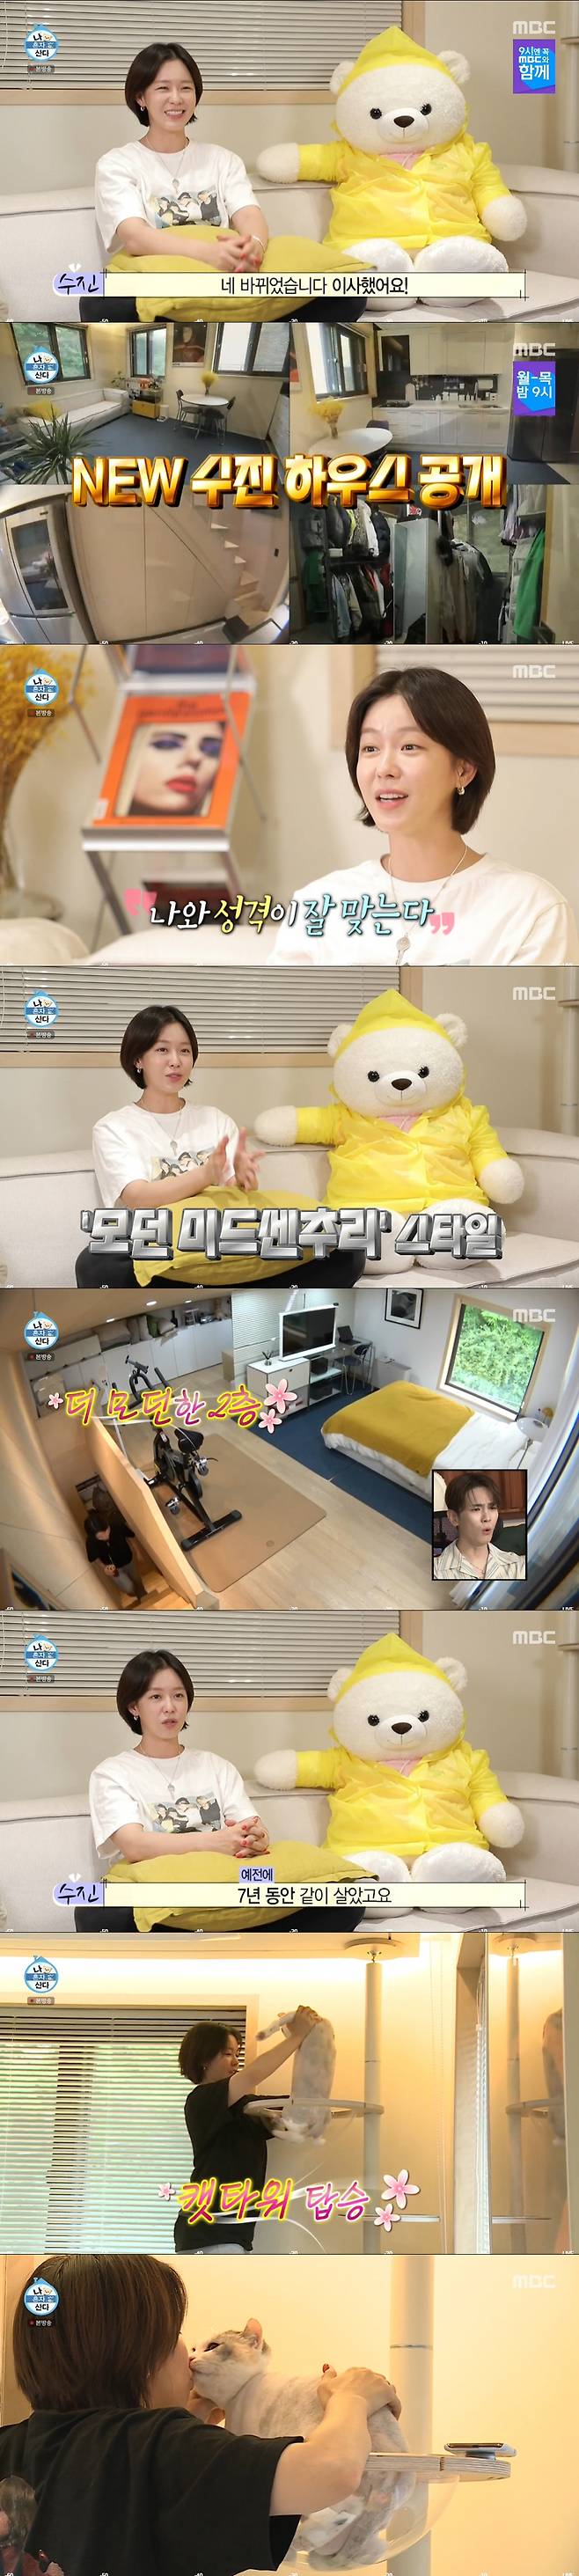 Actor Kyung Soo-jin has unveiled his new Sindang-dong home, which boasts a forest tax area.MBC I Live Alone broadcast on the 25th, Kyung Soo-jins new home adaptation device, which has been in the long time, has been released.On this day, the daily life of Kyung Soo-jin, who moved to Sindang-dong and went on his first neighborhood tour, was drawn.Kyung Soo-jin, who moved in February, surprised Park Na-rae by revealing the recent move to the home of the nature view Terrace, which Park Na-rae introduced in Save me Holmes.After watching the broadcast, I liked the house and moved to see it on sale. I unveiled the inside of the clean house and the Namsan View Terrace, which is decorated with Mid Century Modern Interiors, which is hot these days.Jun Hyun-moo laughed with a clear reaction, Is it air conditioner name?Kyung Soo-jin, who sat in Terrace and drank coffee and charged energy with his companion plant Shikkong, took the tools and made a cat tower for the companion walnut.Kyung Soo-jin, who went on a local tour, stopped by the real estate selling pet products and got information on the side dish shop honey tips, and sold the side dish shop, animal bottle One, hardware store, and tteokbokki shop.Kyung Soo-jin, who returned home, played music in Terrace in the rainy scenery and had a perfect healing time with an instant tteokbokki and a beer mukbang.Kyung Soo-jin said, If you moved to Sindang-dong, the story of Tteokbokki came out every time and it was really good to have tteokbokki noiroje.It is so delicious, he said, causing a mouthful with the actresss steamy expression parade.In addition, Kyung Soo-jin repaired the table to increase the size of the table, causing admiration, while putting lights in a beer can and instantly creating mood lights, revealing the gold clath of the commander who is good at self-interiors.Kyung Soo-jin, who finished his neighborhood tour at a new home on the day, confessed, I do not want to stay at home but want to communicate with the neighborhood in the future.